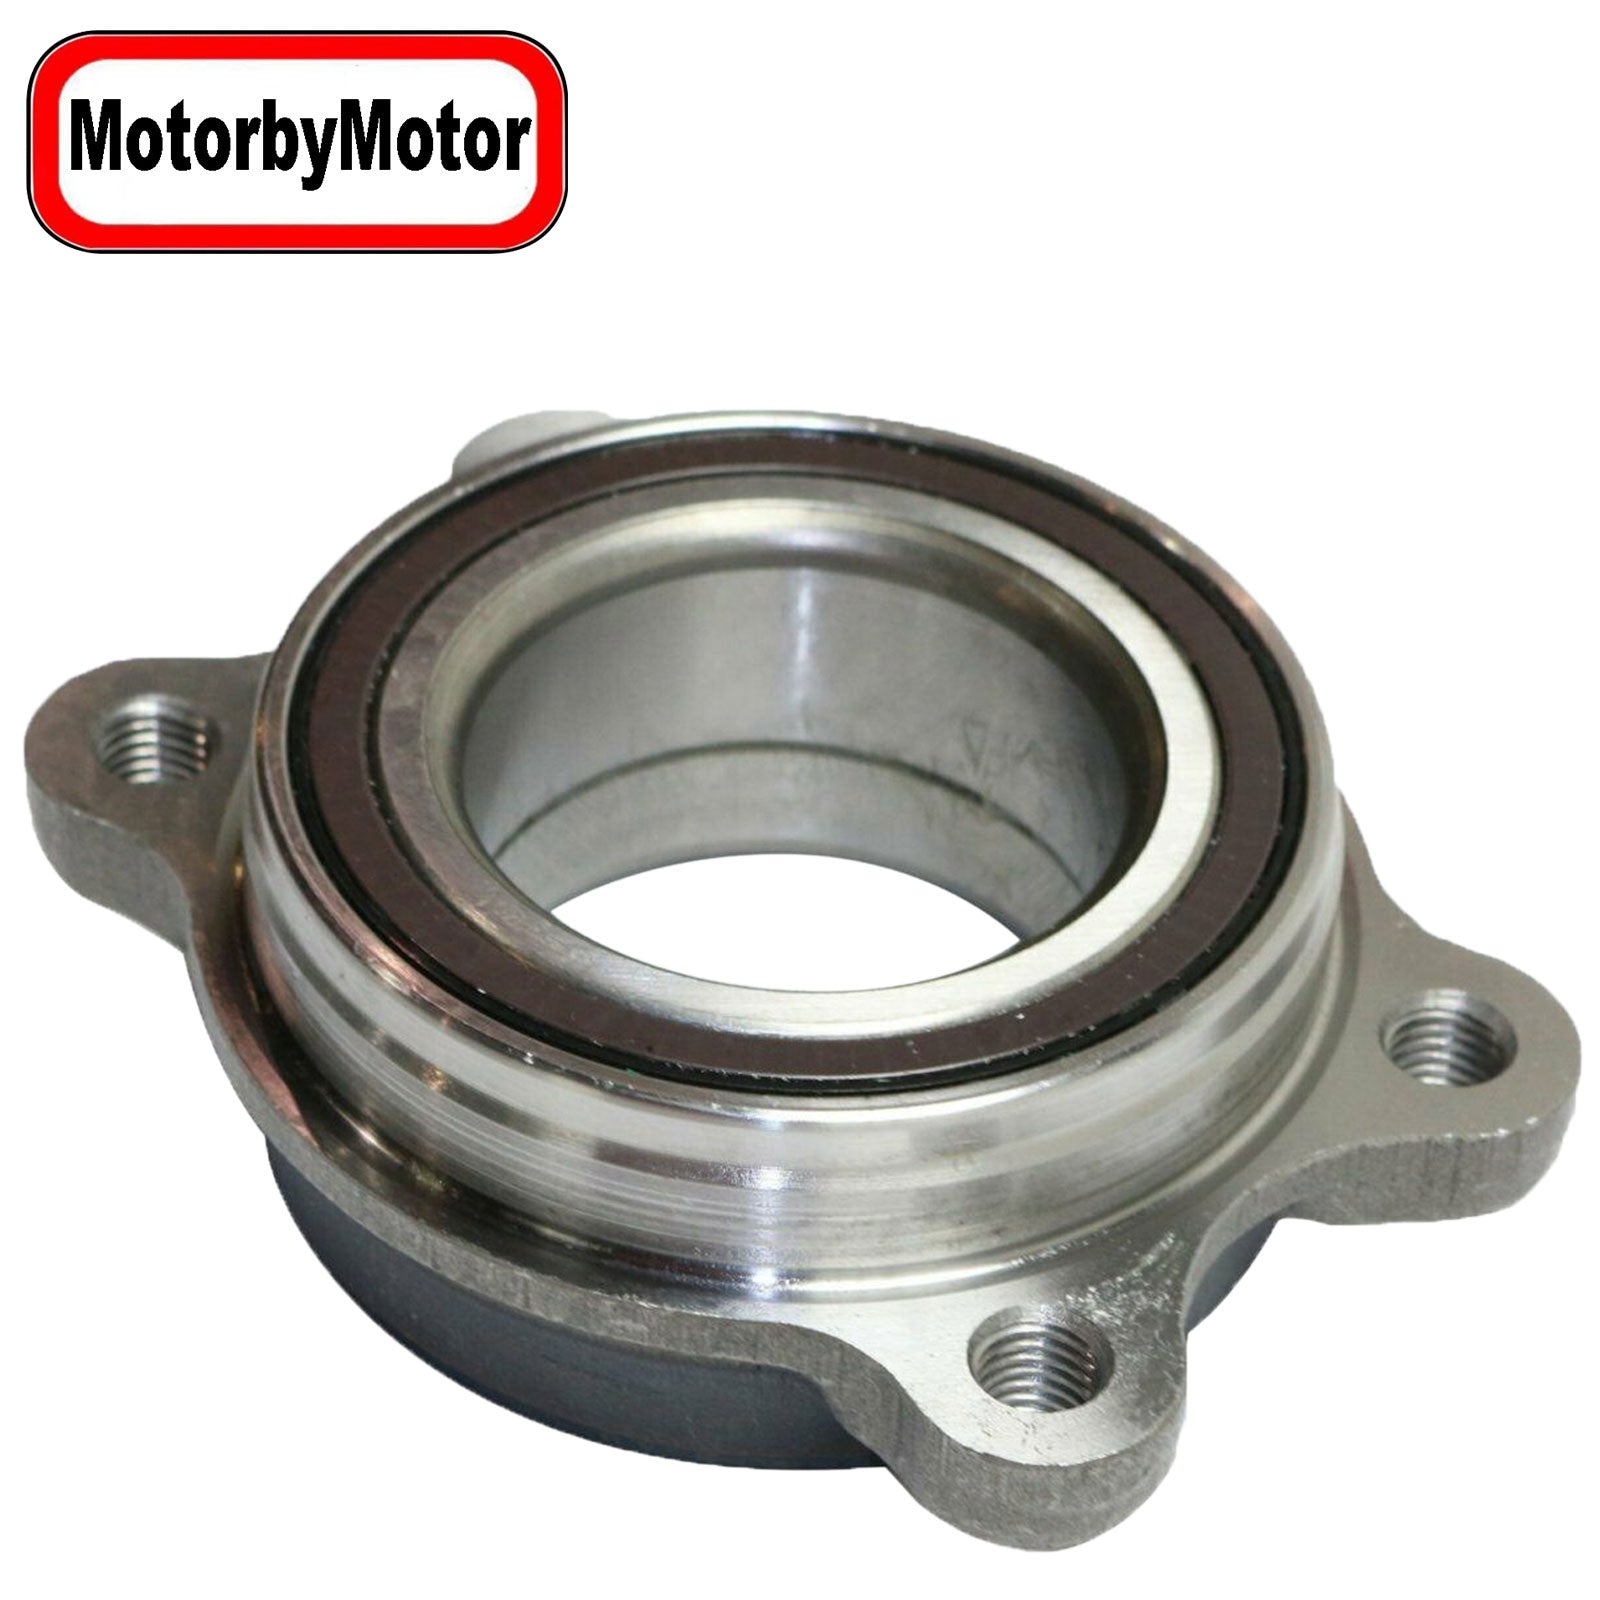 MotorbyMotor 513301 Front Wheel Bearing and Hub Assembly Fit for Audi A4 Quattro A4 Q5 S5 S4 A7 A8 allroad S6 SQ5 A5 A6 RS5 RS7 S7 S8 Low-Runout OE Directly Replacement Hub Bearing w/ABS MotorbyMotor